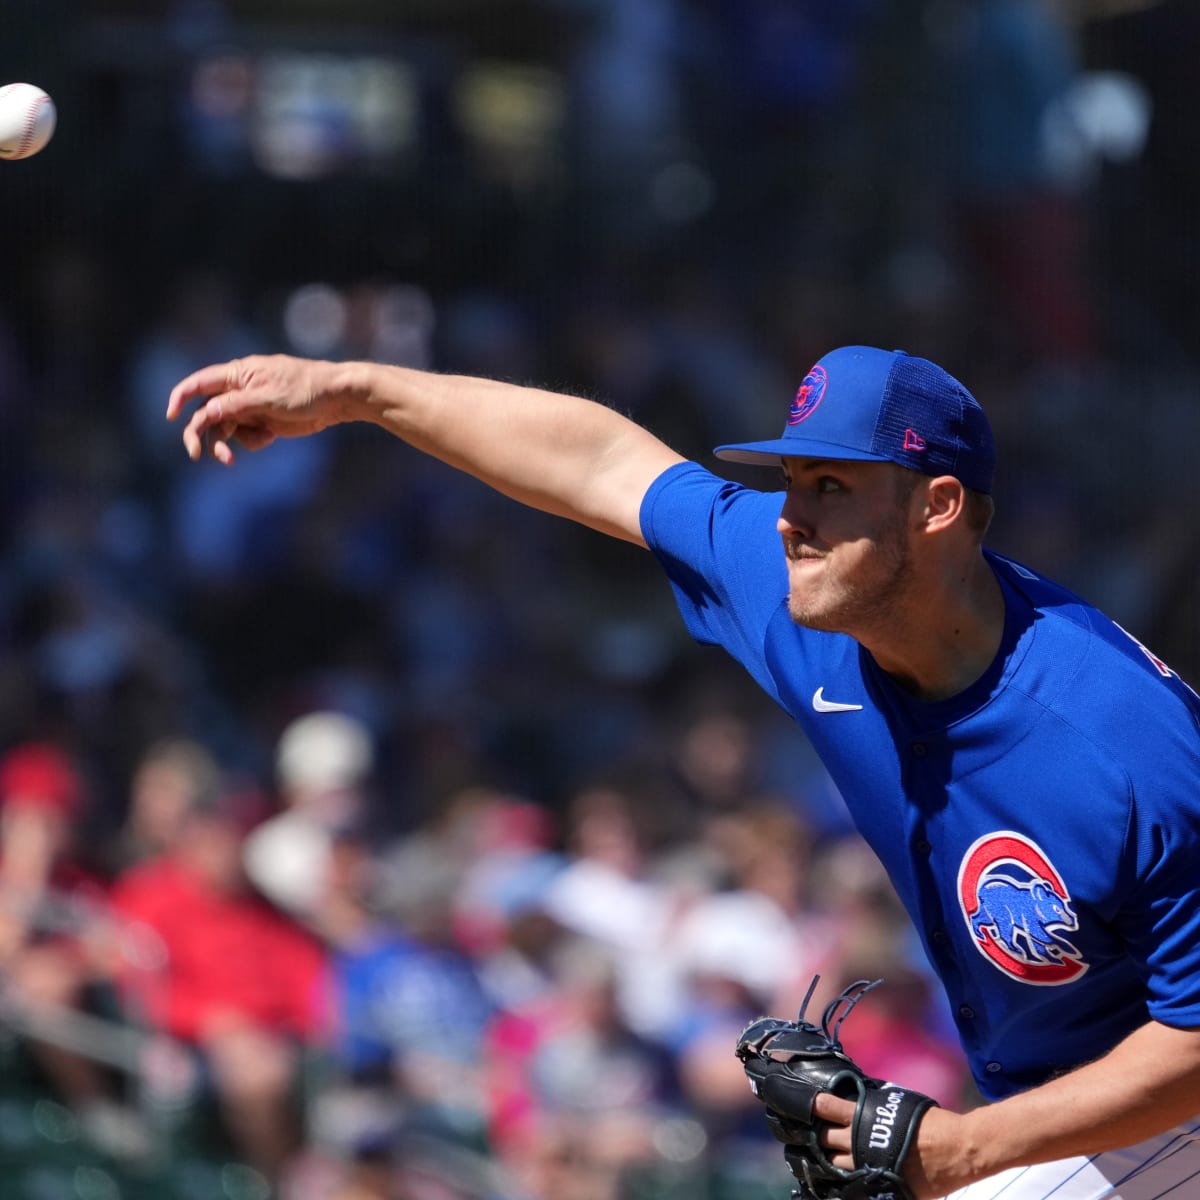 Taillon working on new slider in spring training with Cubs